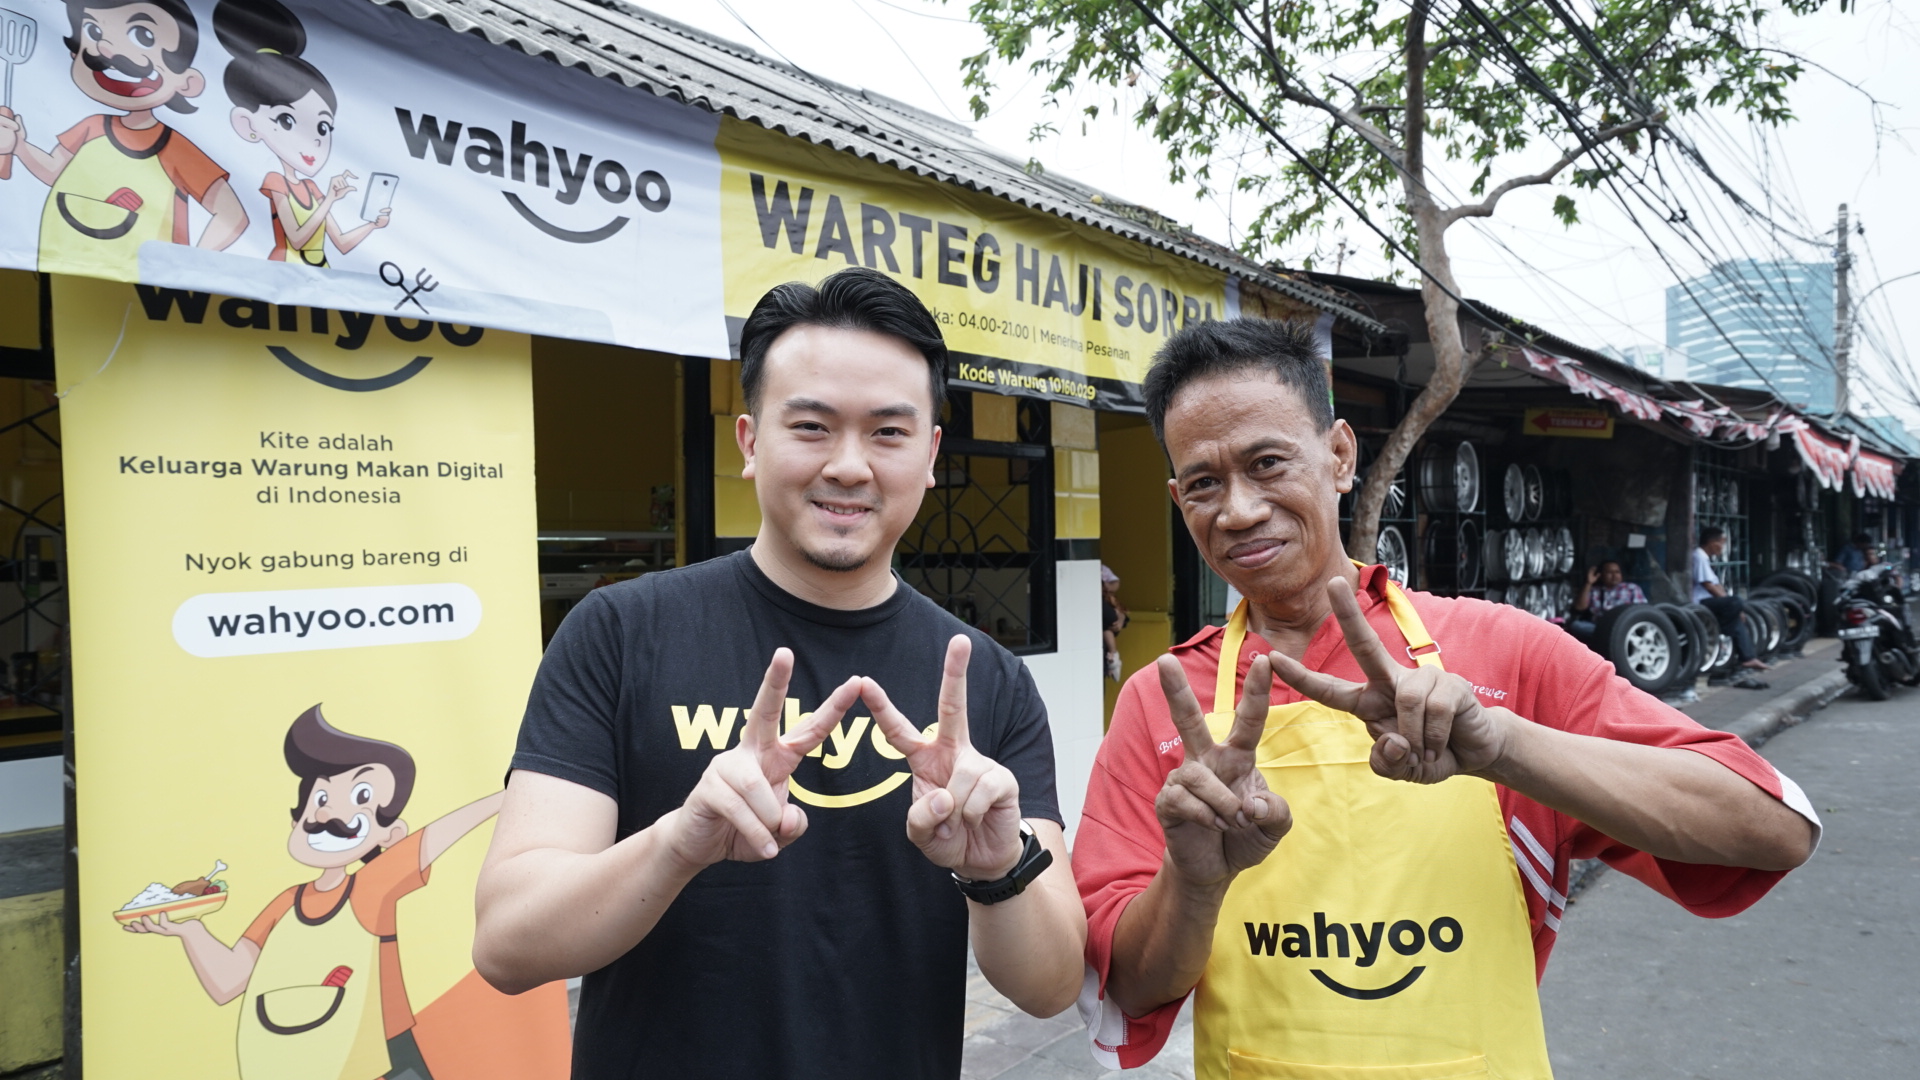 Indonesian retail startup Wahyoo snags USD 5 million funding, introduces new business lines